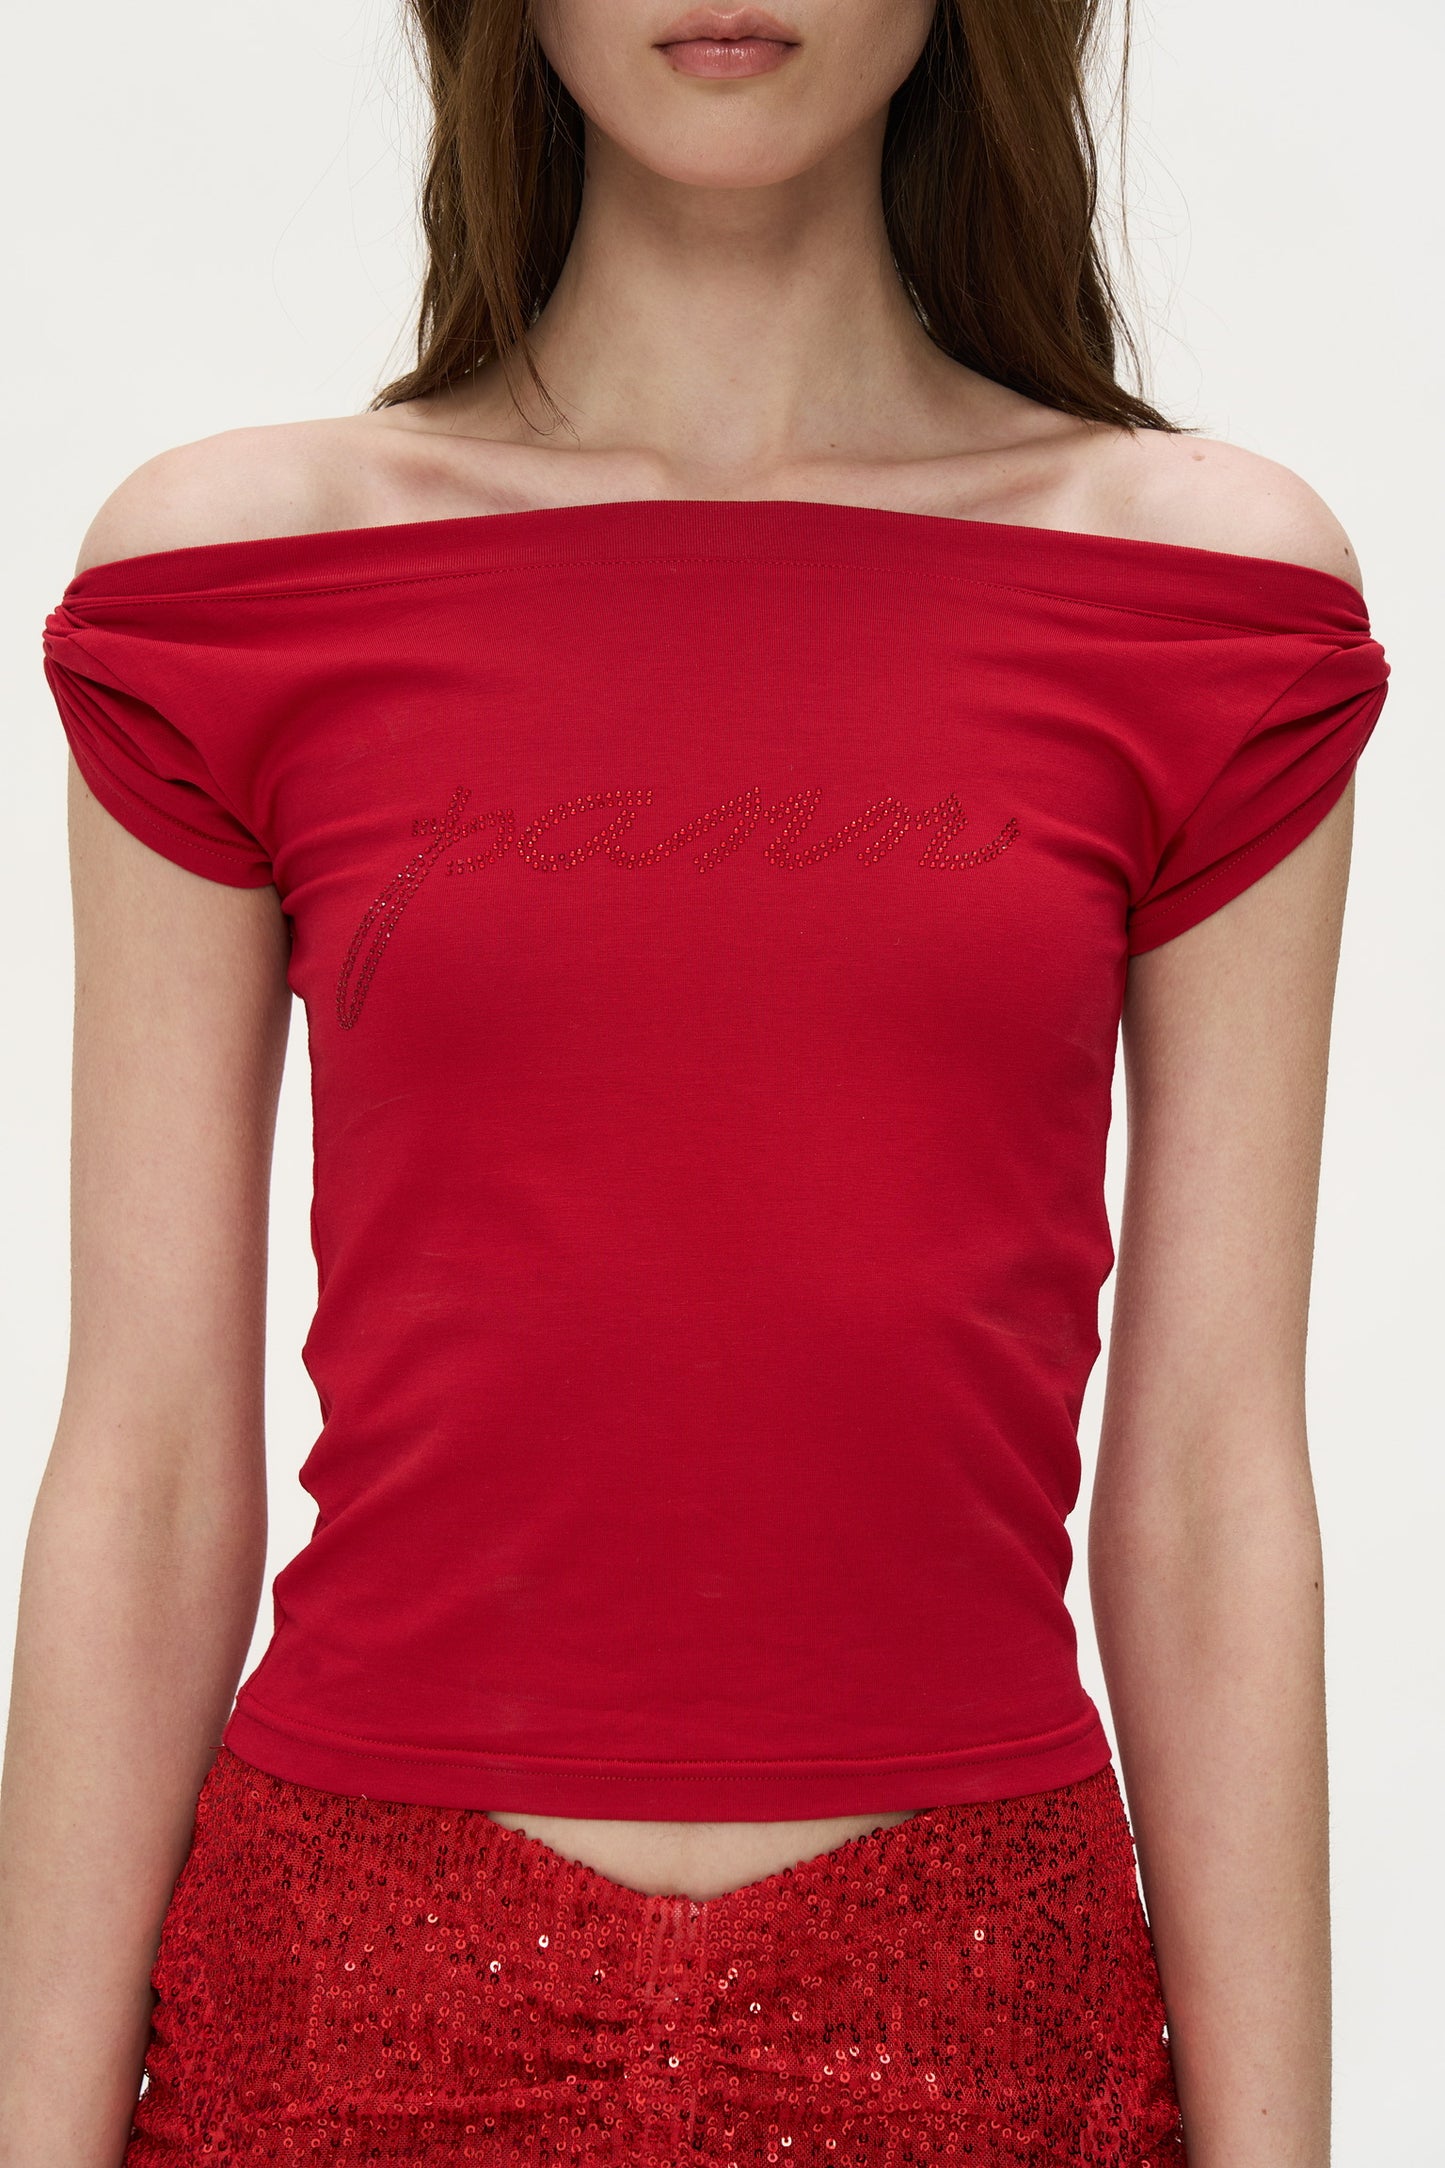 Ada Boat Neck T-Shirt in Red